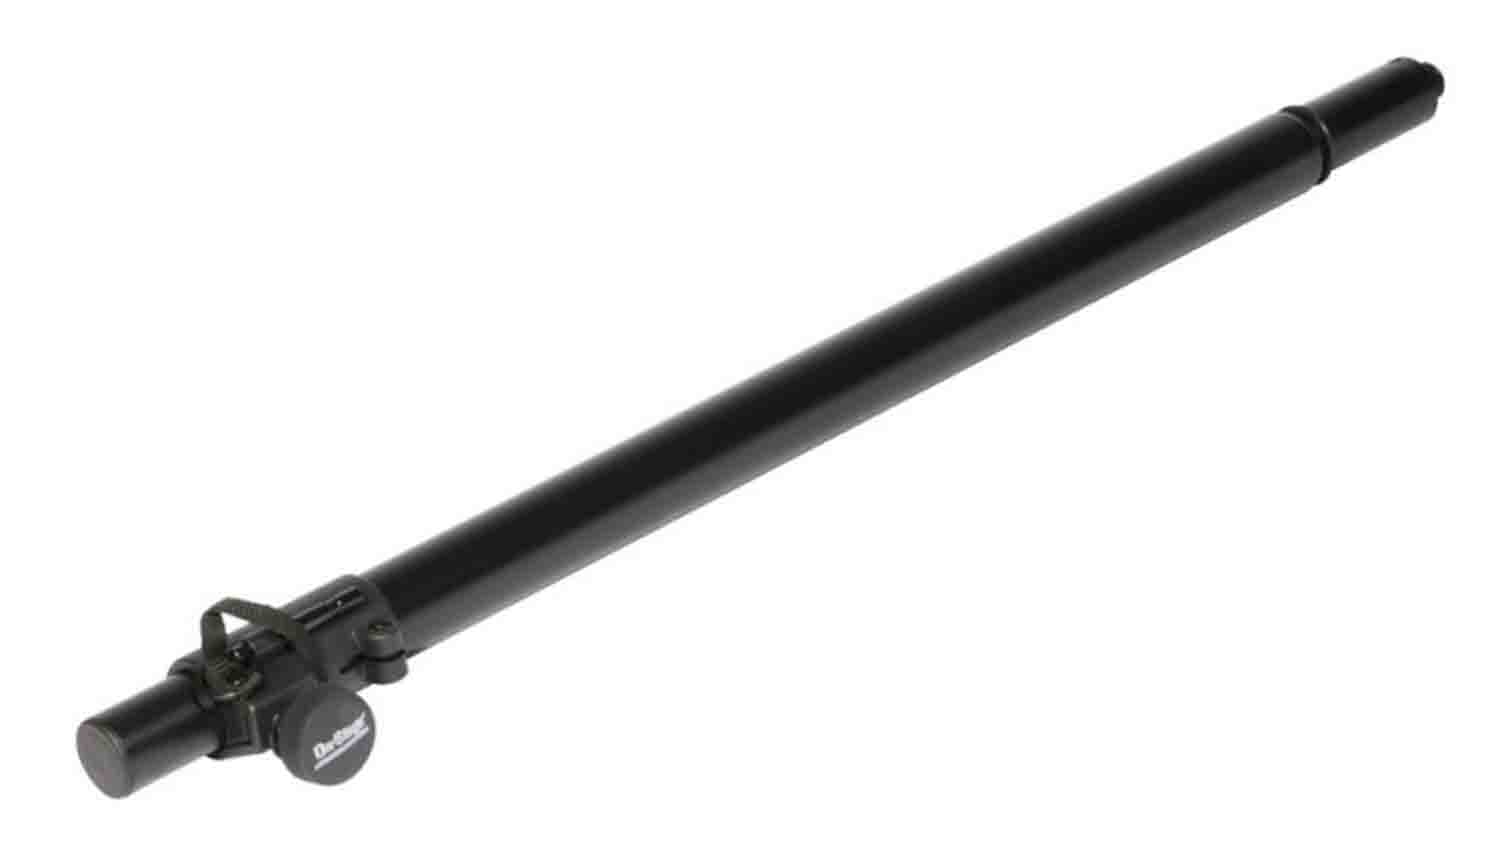 OnStage SS7746 Subwoofer Pole with M20 Thread - Black - Hollywood DJ